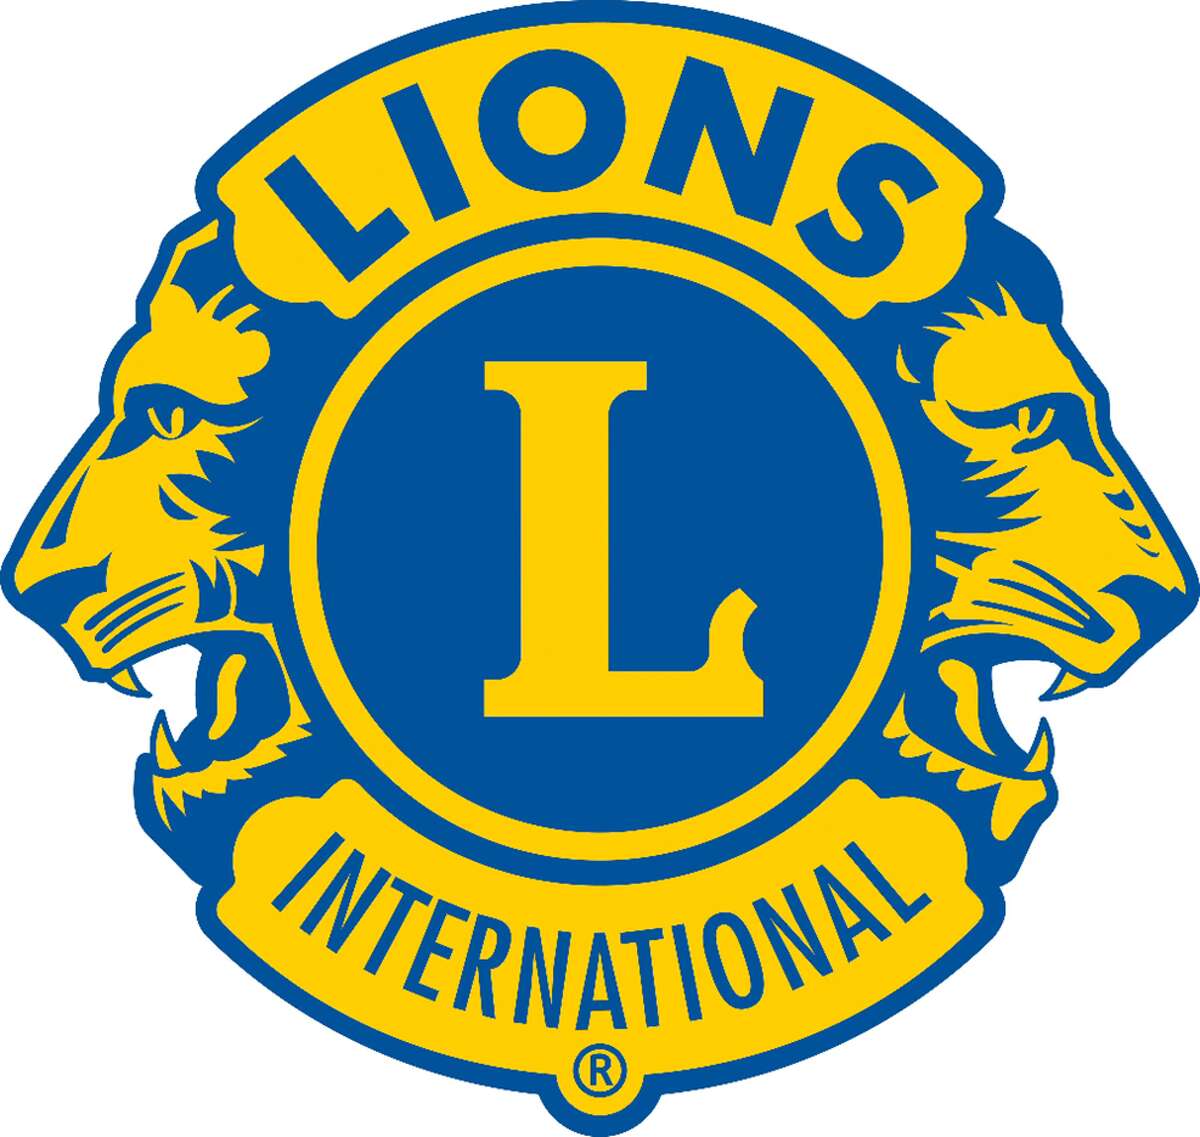 The Big Rapids Lion's Club is hosting a fundraiser golf outing at Clear Lake Golf Course on June 15. Proceeds will support ongoing Lions Club projects.